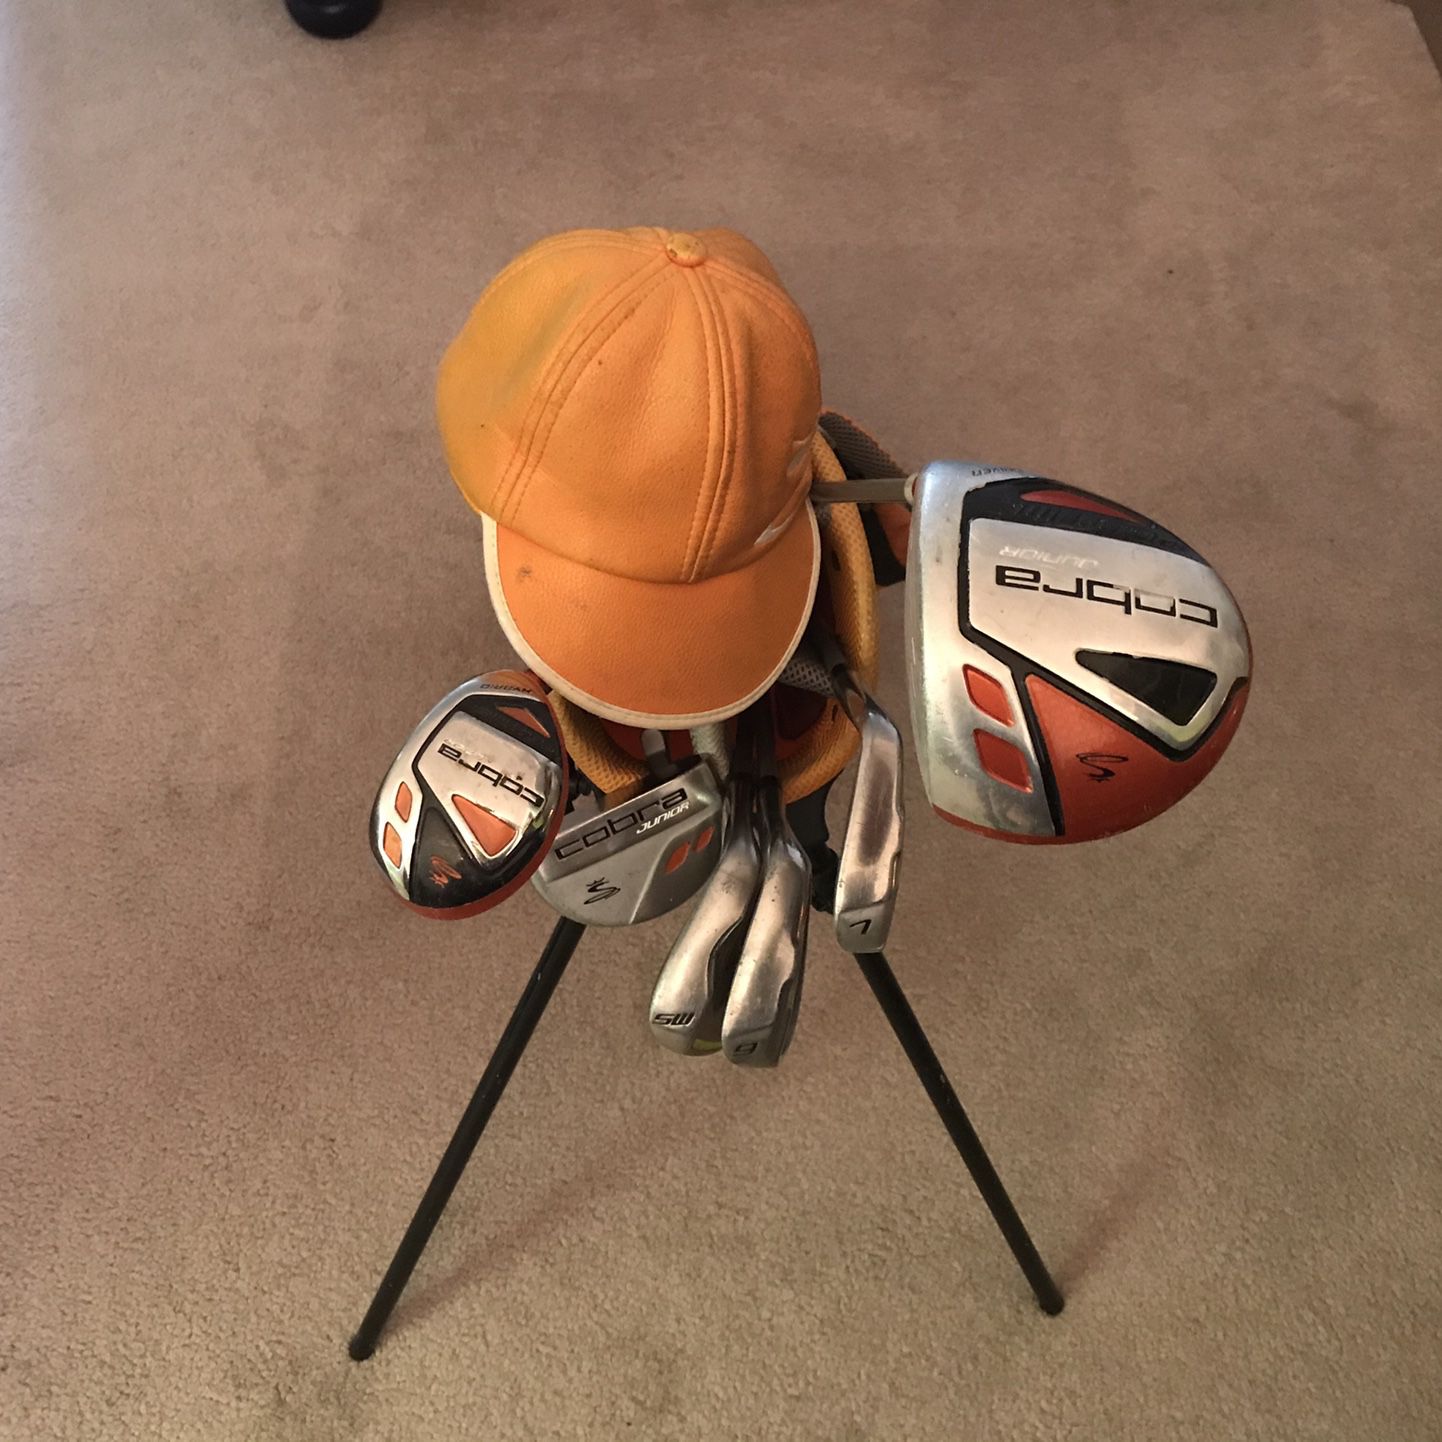 Ricky Fowler Kids Golf Club set with bag and head cover